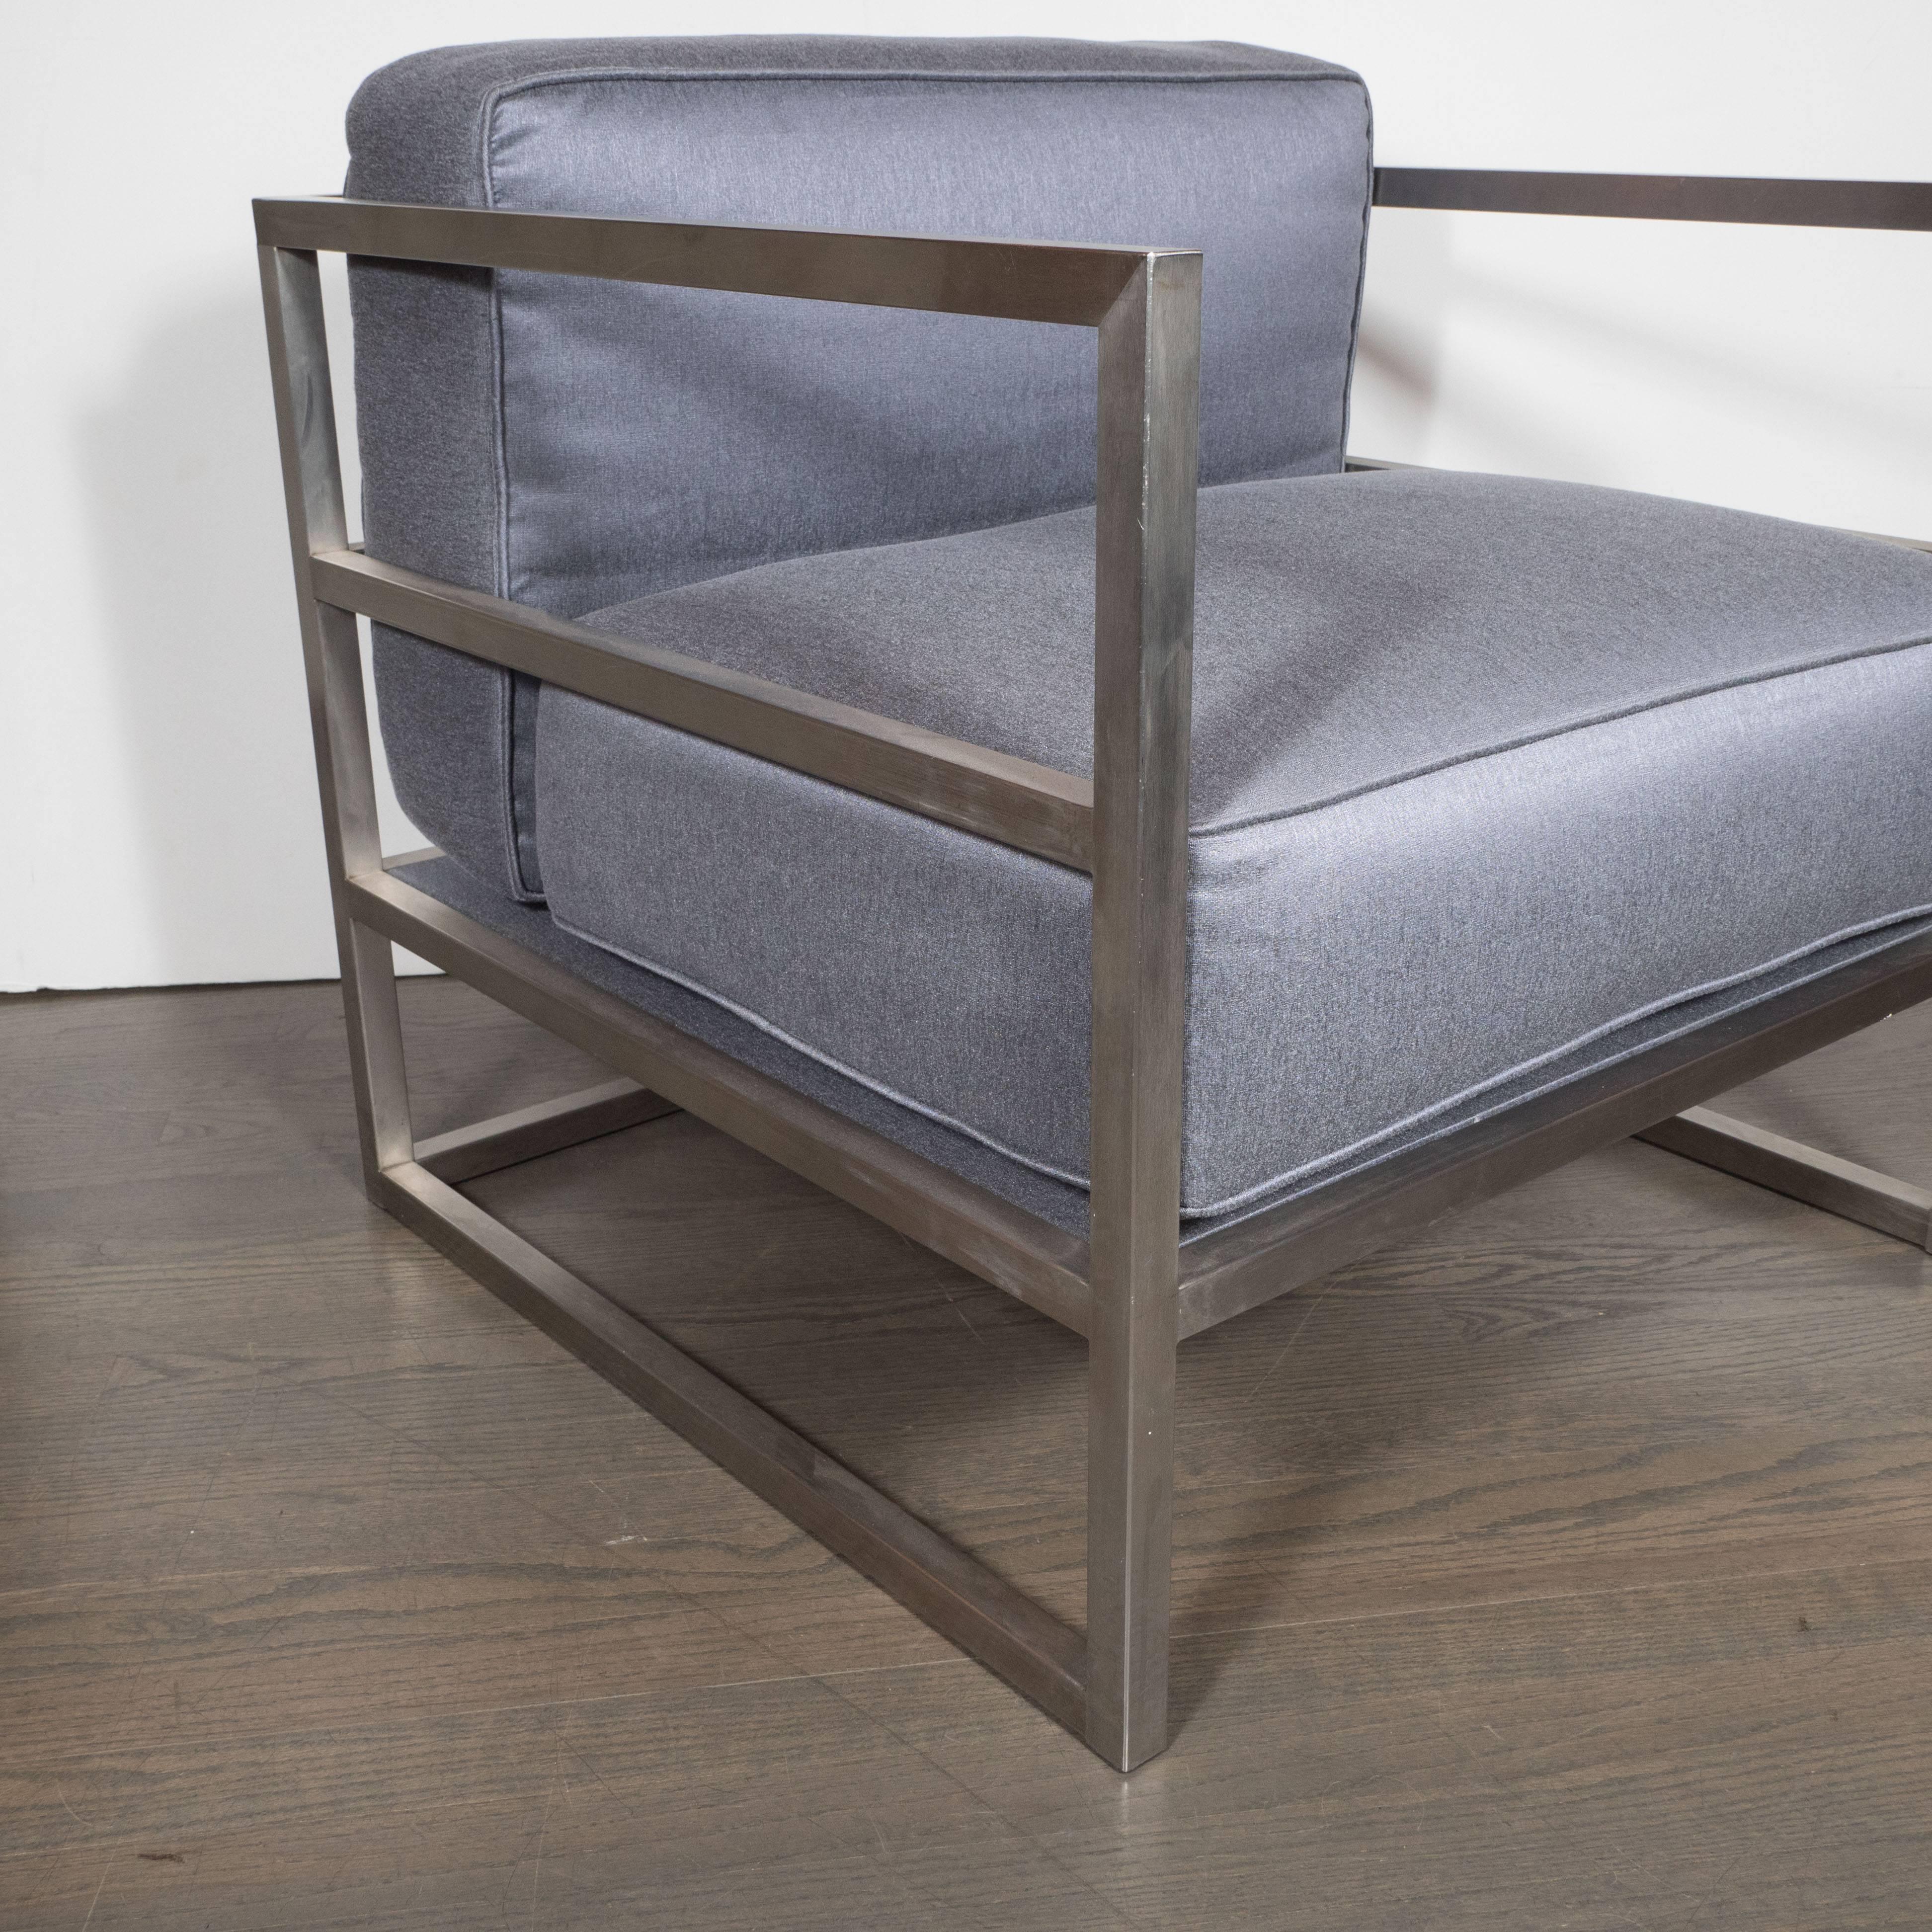 This pair of lounge/club chairs features a Minimalist frame consisting of four horizontal beams intersected perpendicularly at the corners by posts to form a three sided cube. The structure has been handcrafted in forged and brushed aluminium. The